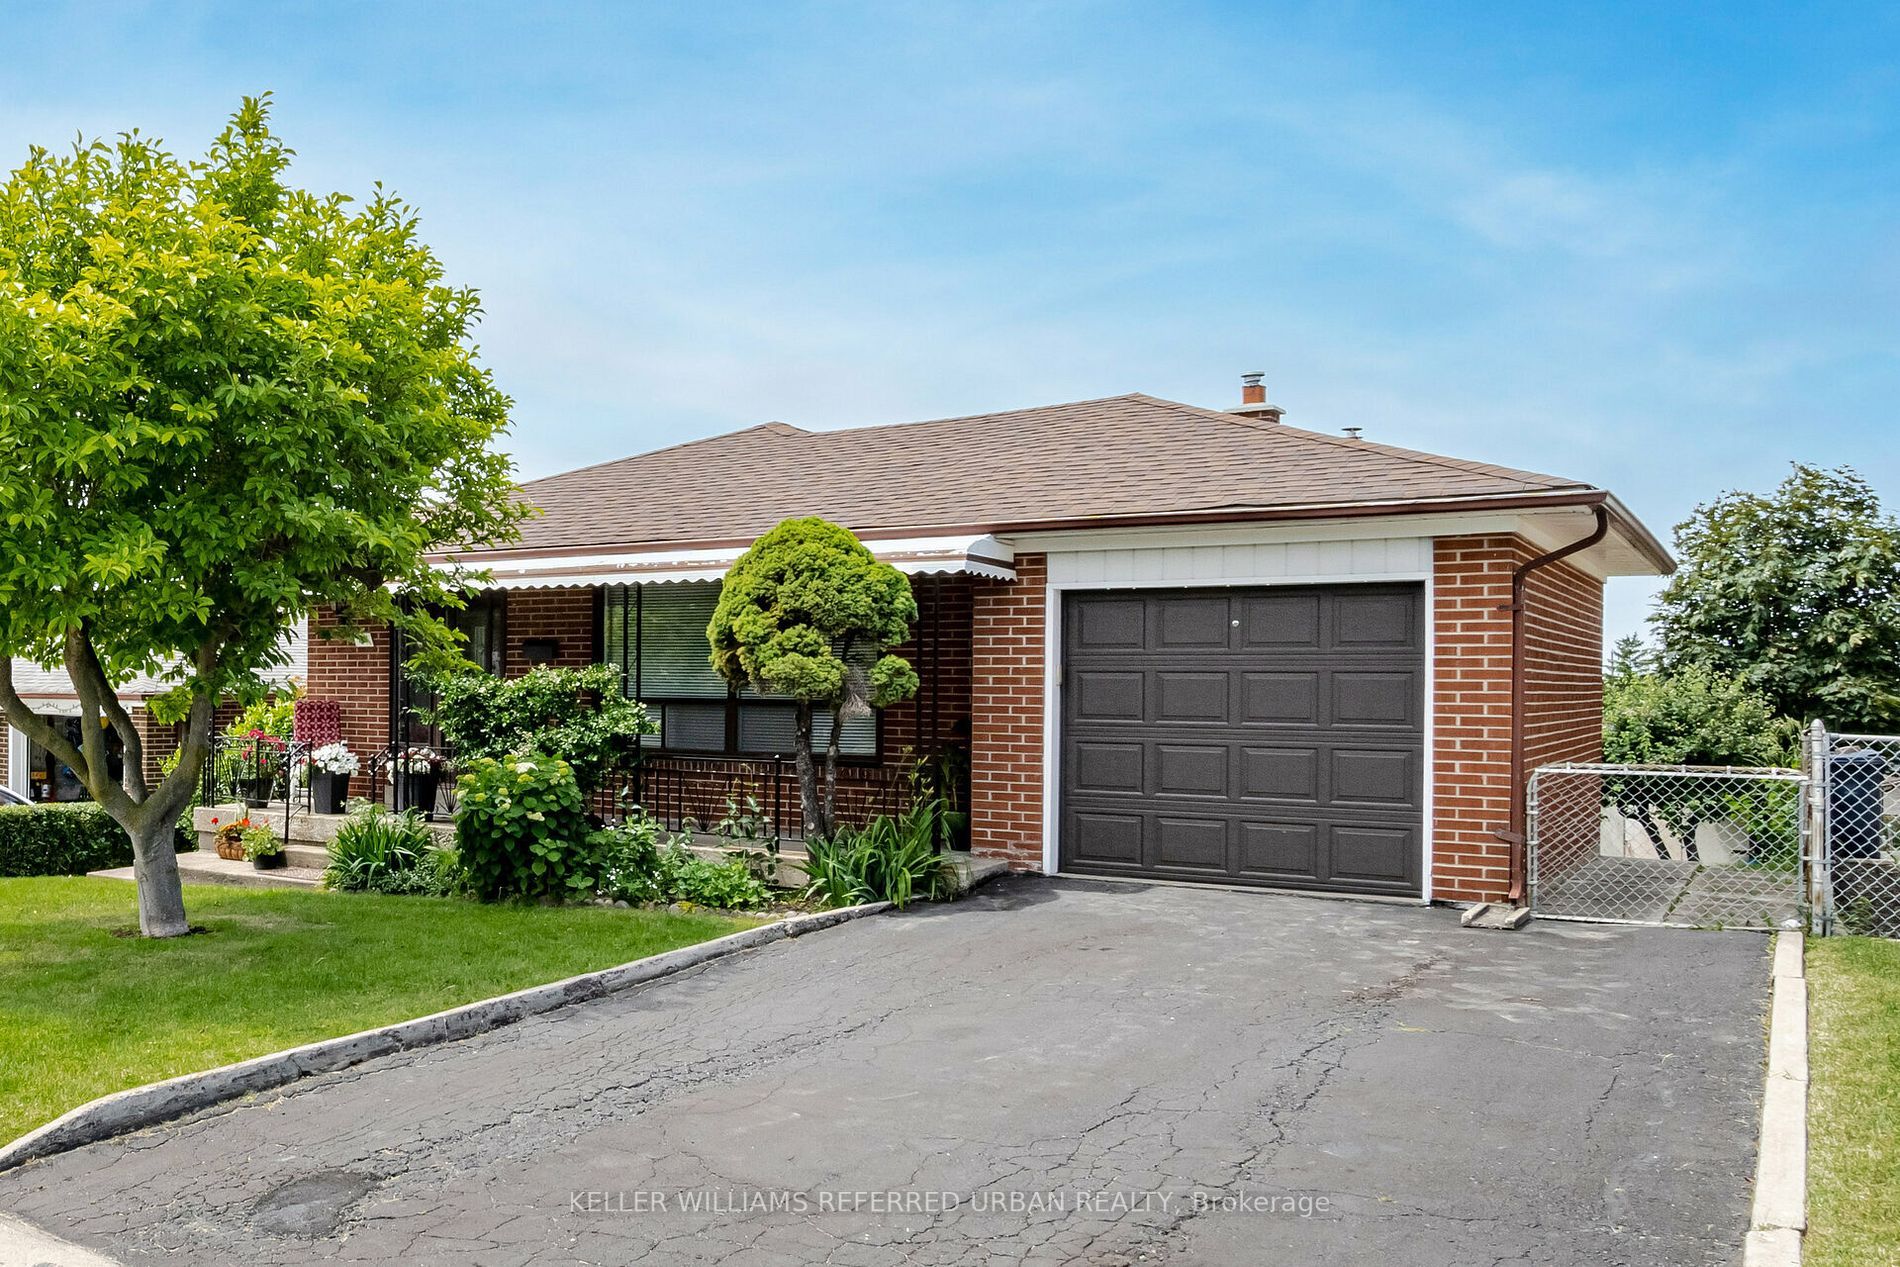 I have sold a property at 68 Laura RD in Toronto
